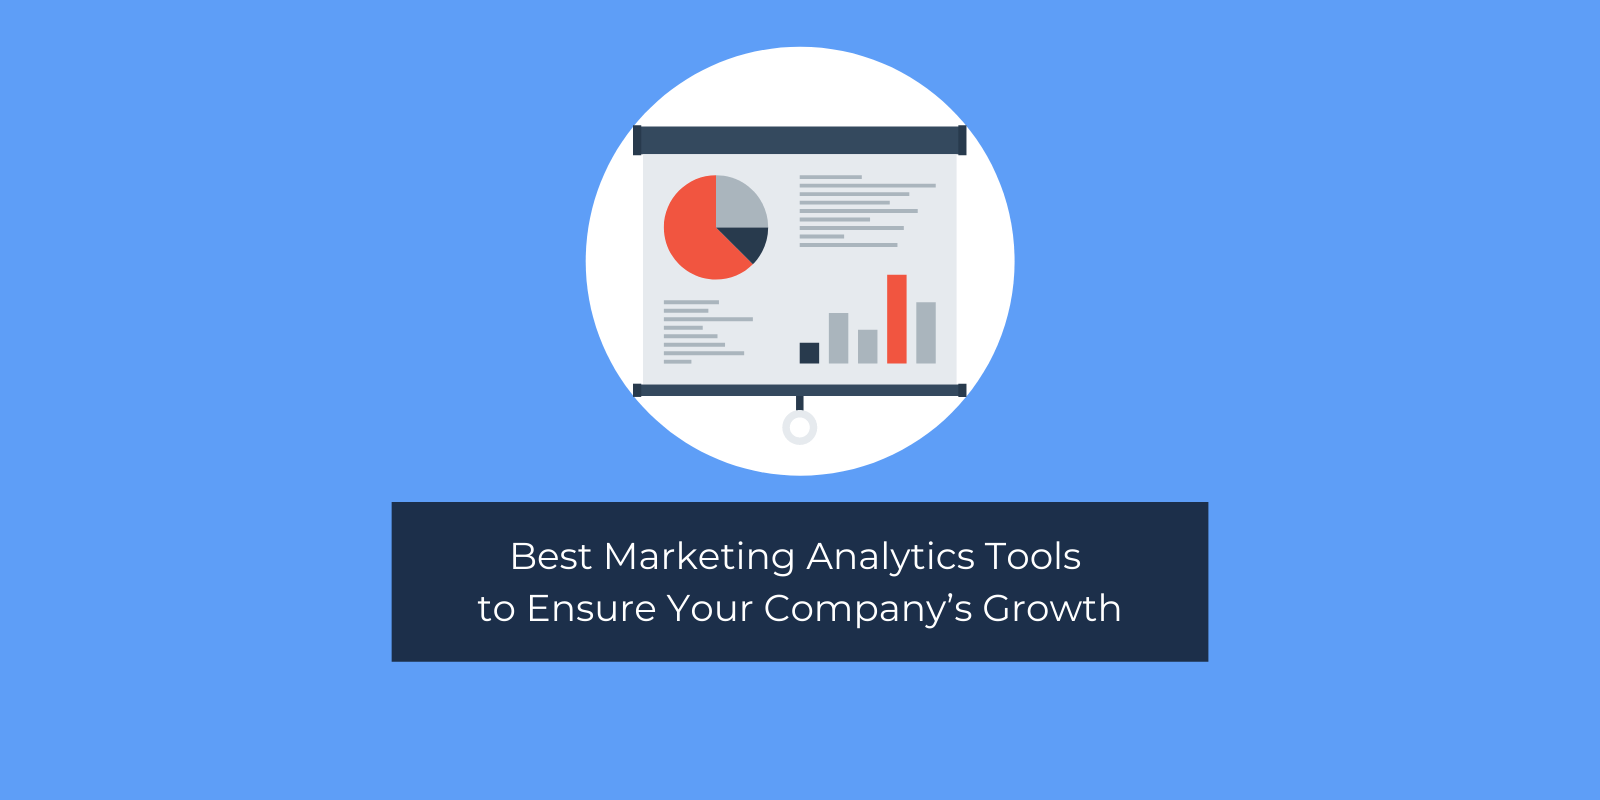 Best Marketing Analytics Tools to Ensure Your Company’s Growth